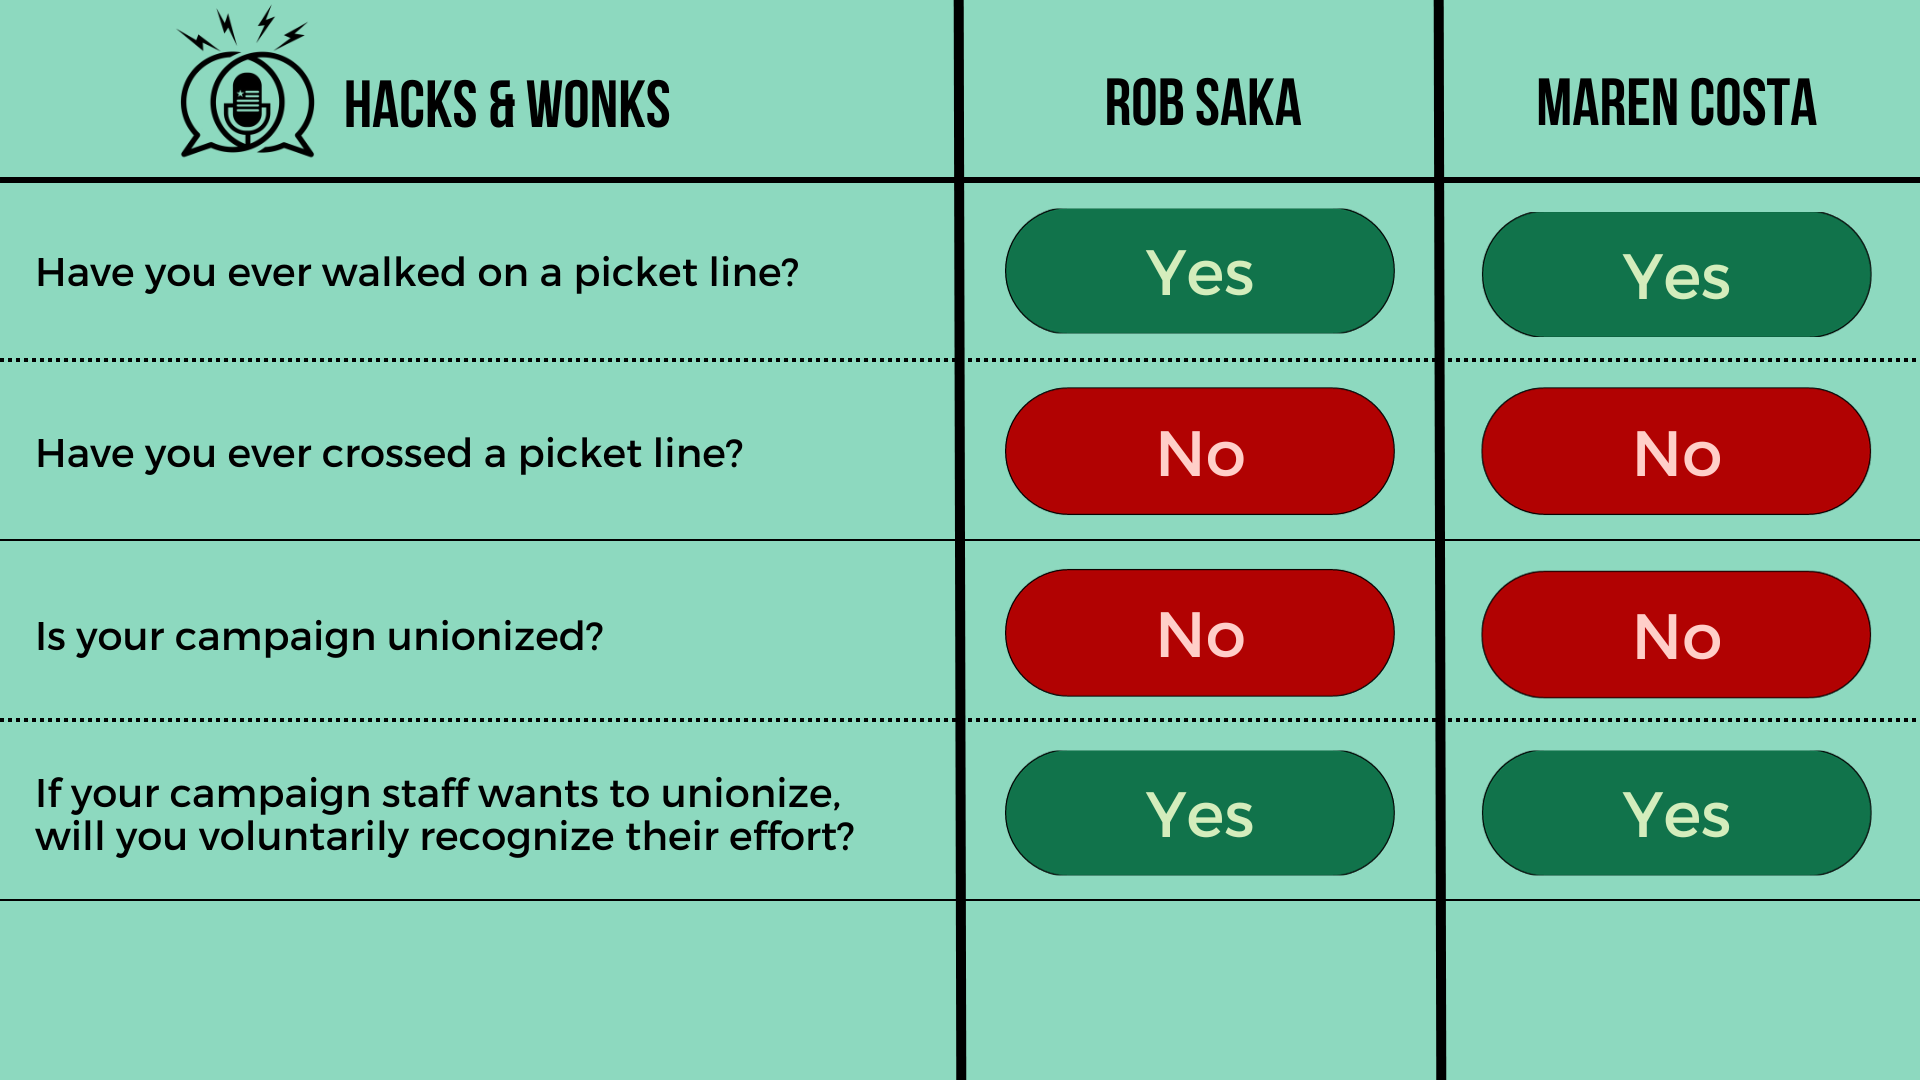 Q: Have you ever walked on a picket line? Rob Saka: Yes, Maren Costa: Yes  Q: Have you ever crossed a picket line? Rob Saka: No, Maren Costa: No  Q: Is your campaign unionized? Rob Saka: No, Maren Costa: No  Q: If your campaign staff wants to unioniz